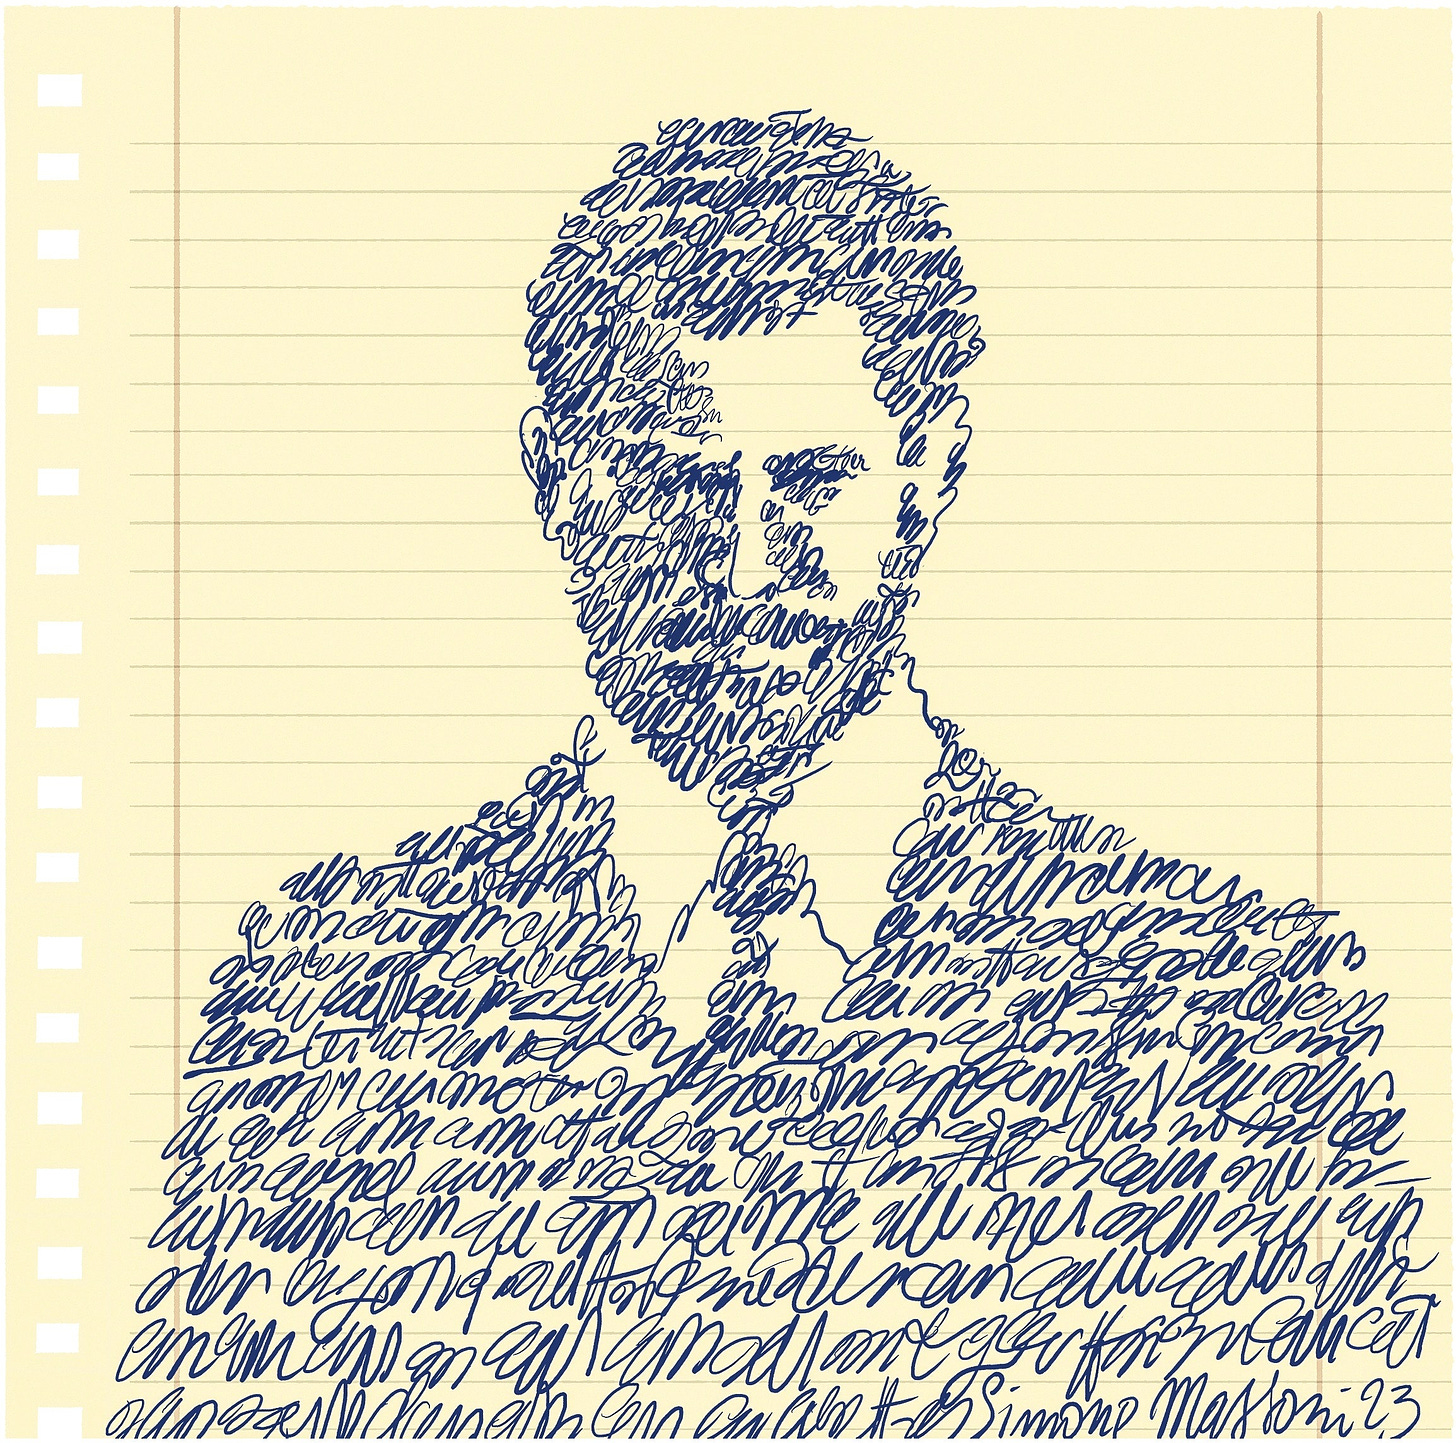 A portrait of Prince Harry composed of scribbles that evoke writing on a yellow piece of binder paper.